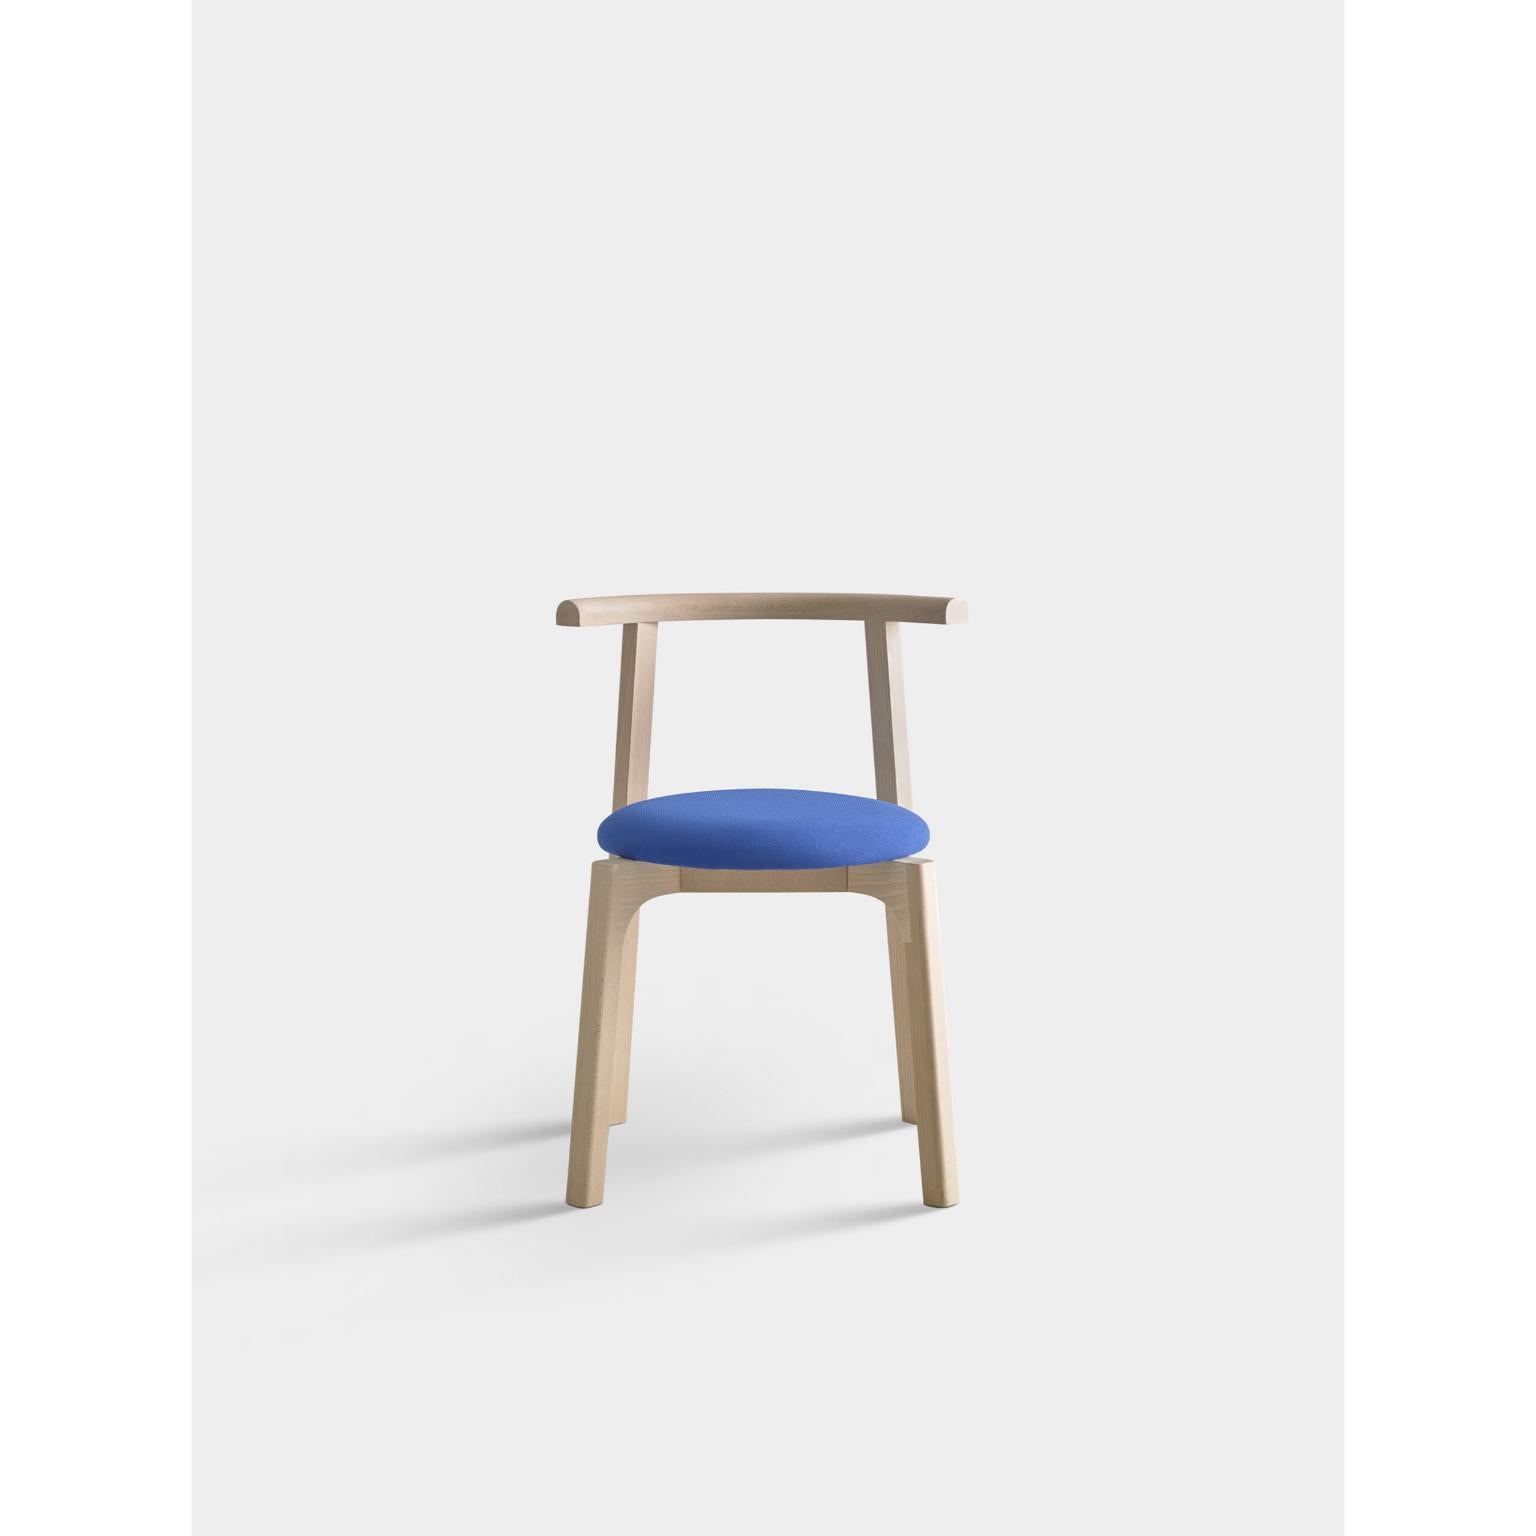 Carlo Beech Wood Chair by Pepe Albargues
Dimensions: W 55 x D 51 x H 73 cm 
Materials: Beech wood structure, foam CMHR

Variations of materials are avaliable
Carlo is a chair in which the straight and curved lines show a perfect harmony to get a